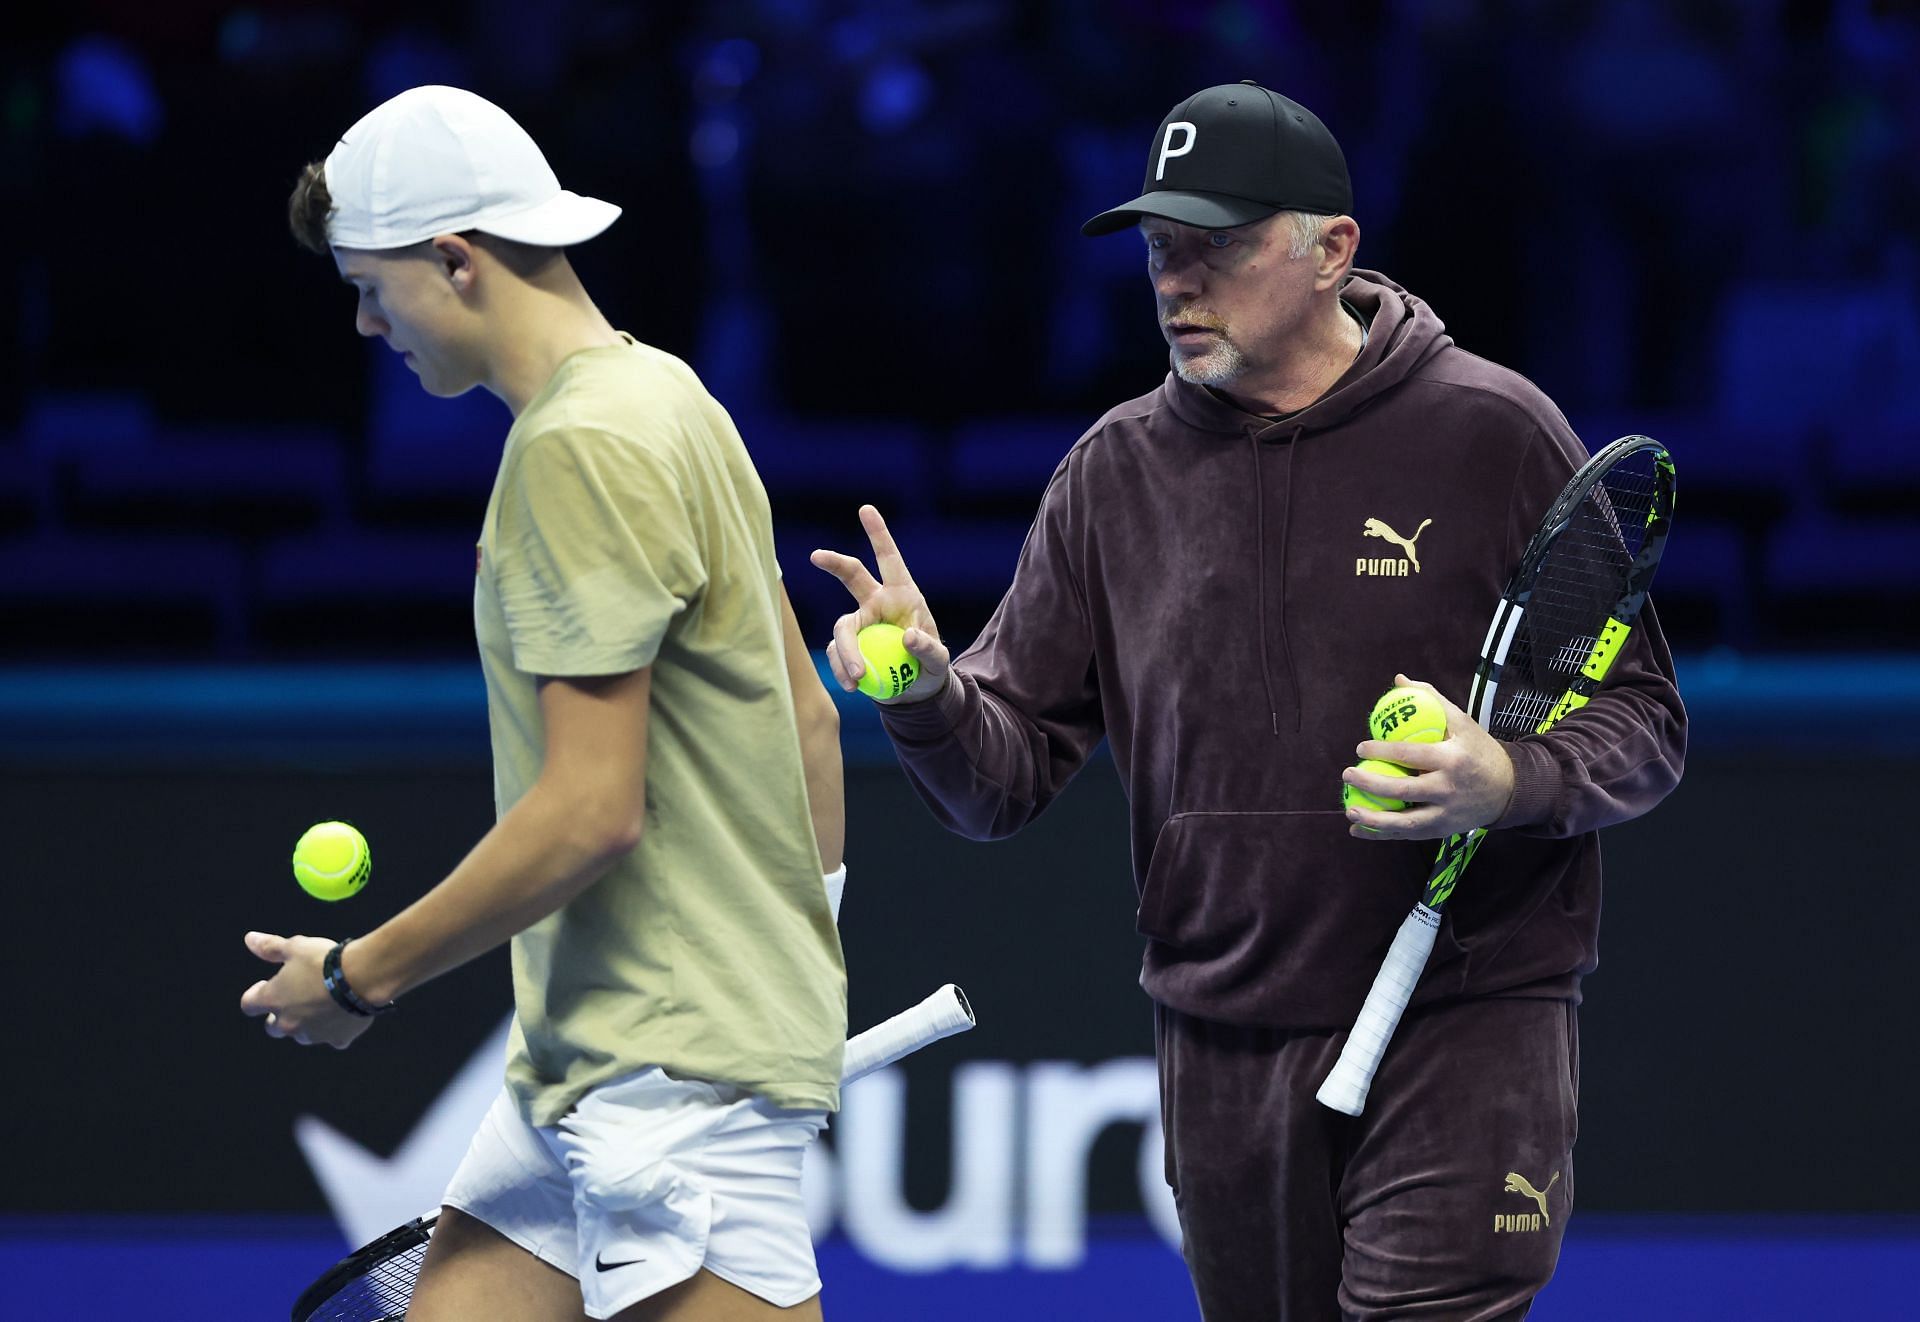 Boris Becker (R) with Holger Rune (L) at the 2023 Nitto ATP Finals